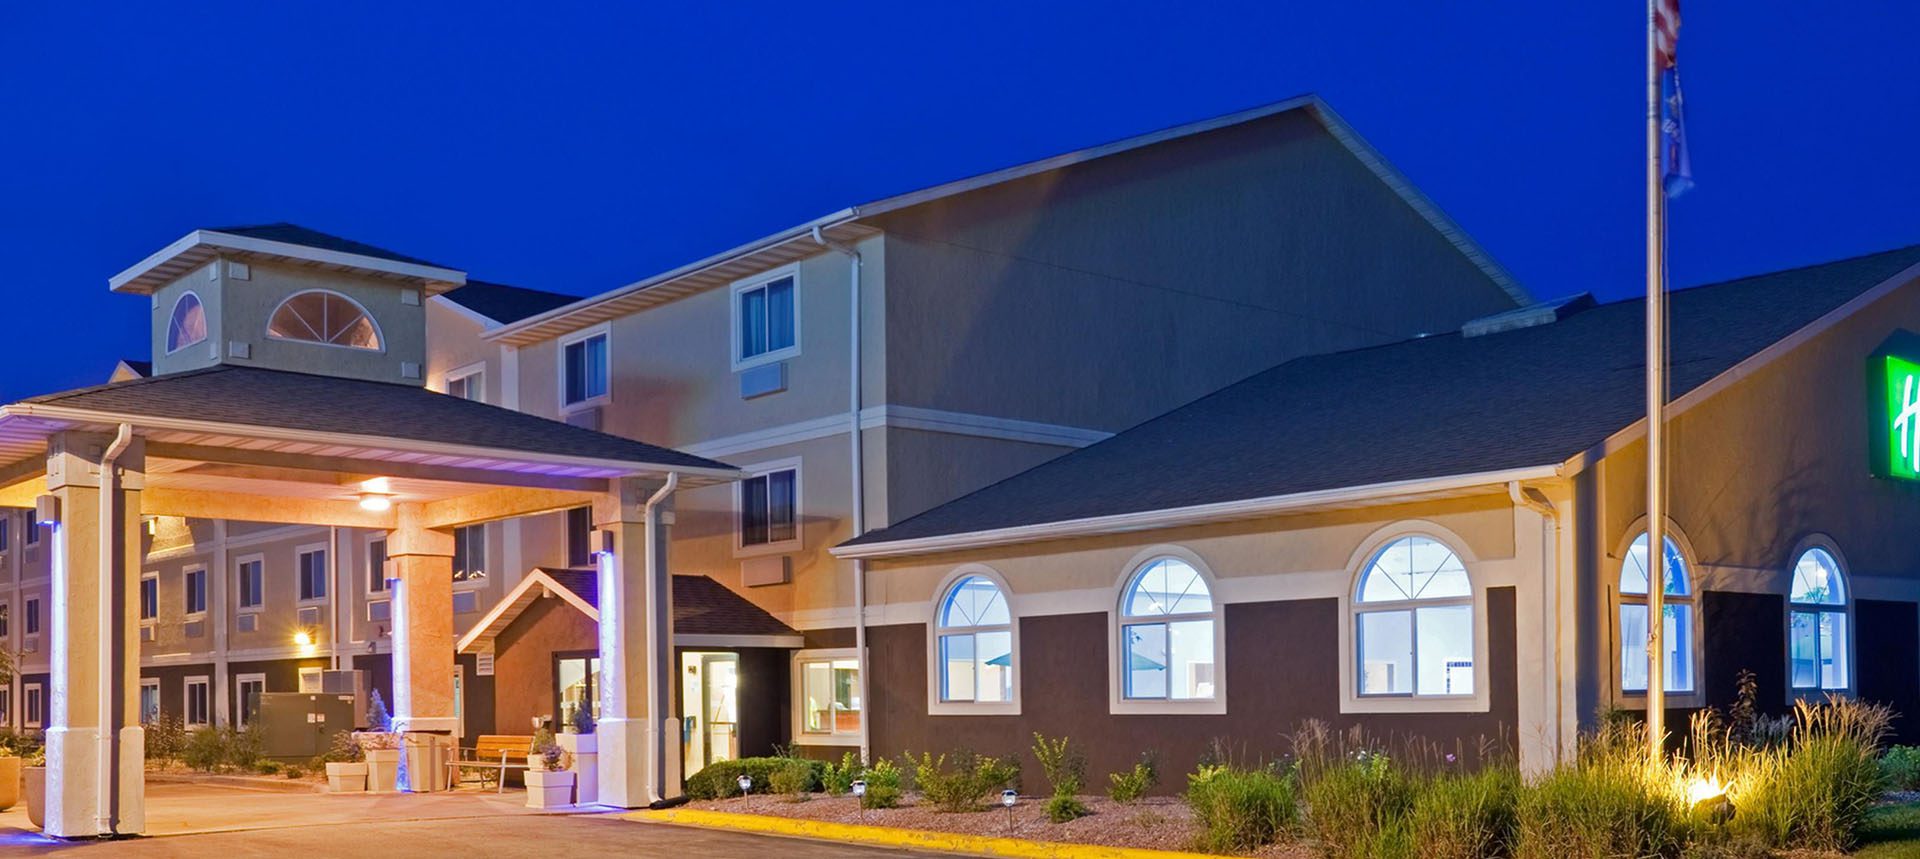 We maximize the hotel owner’s return on investment with honesty and respect.